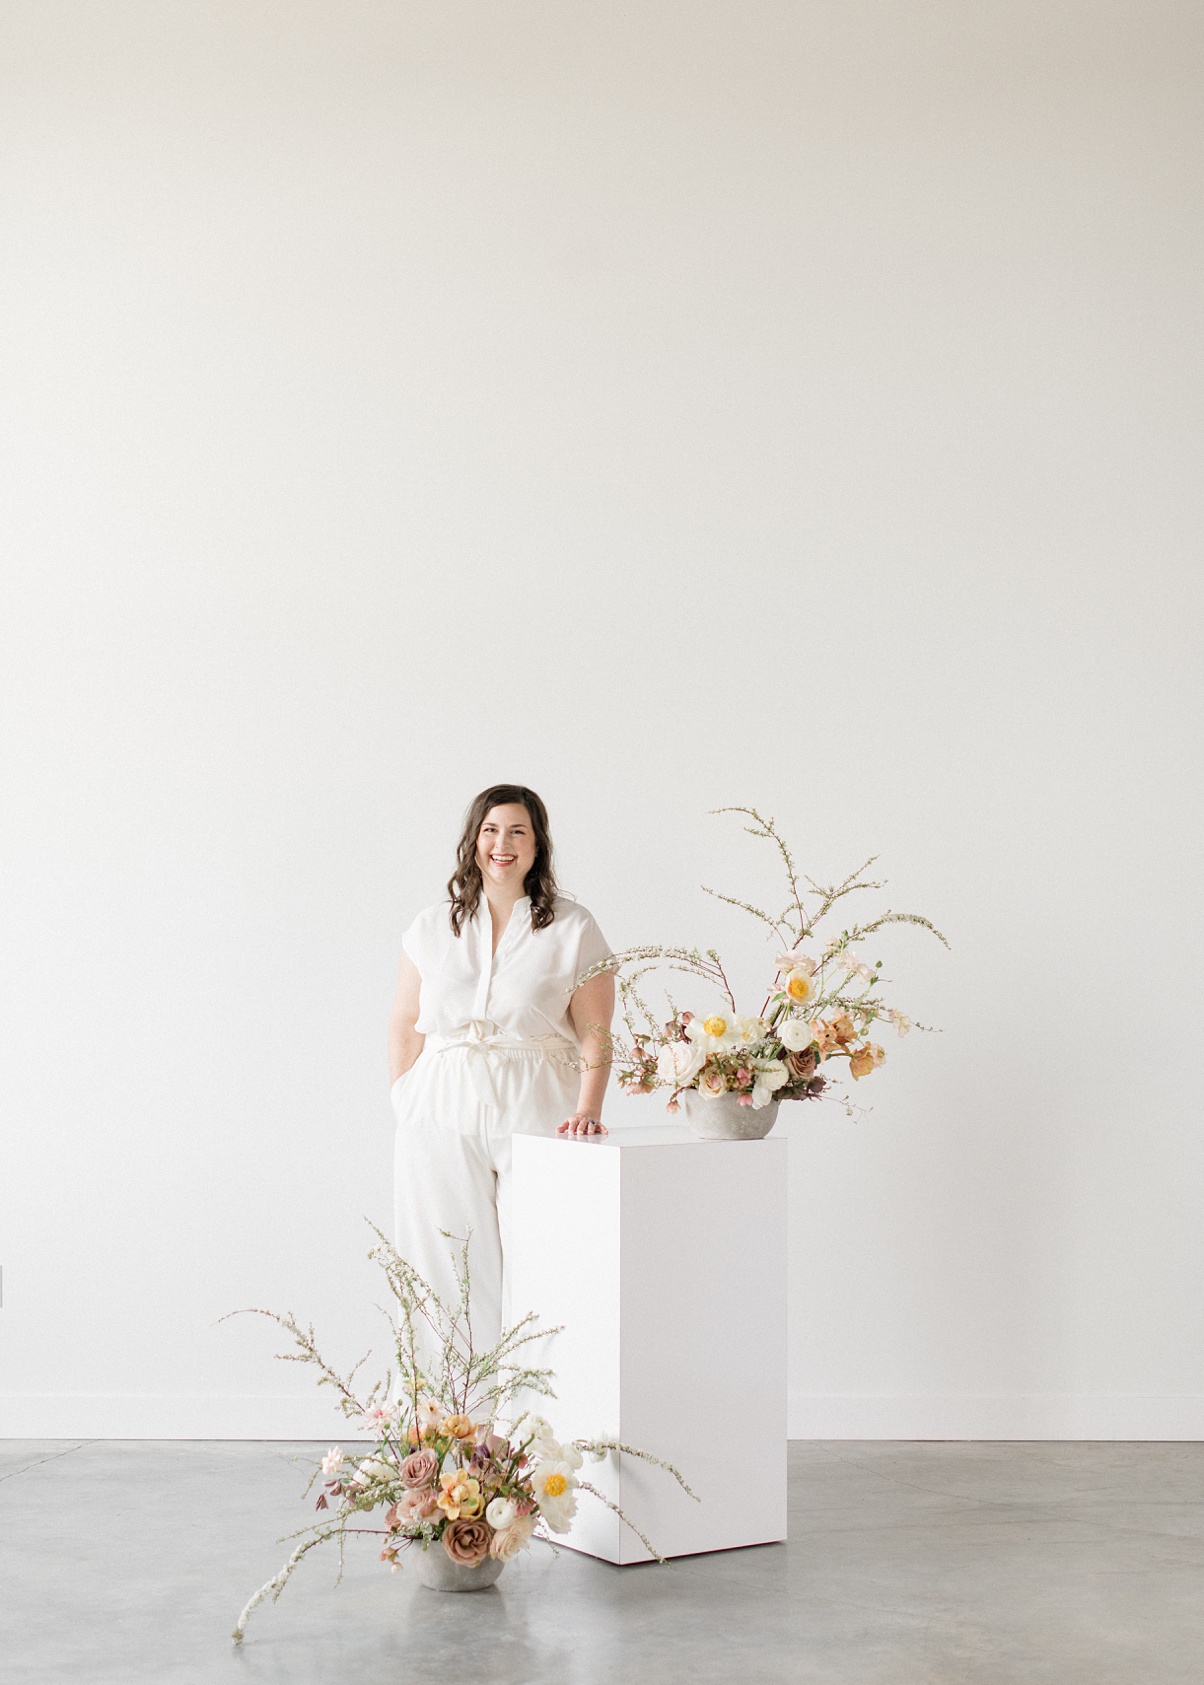 Owner Carolyn Kulb standing next to floral arrangements on a pillar